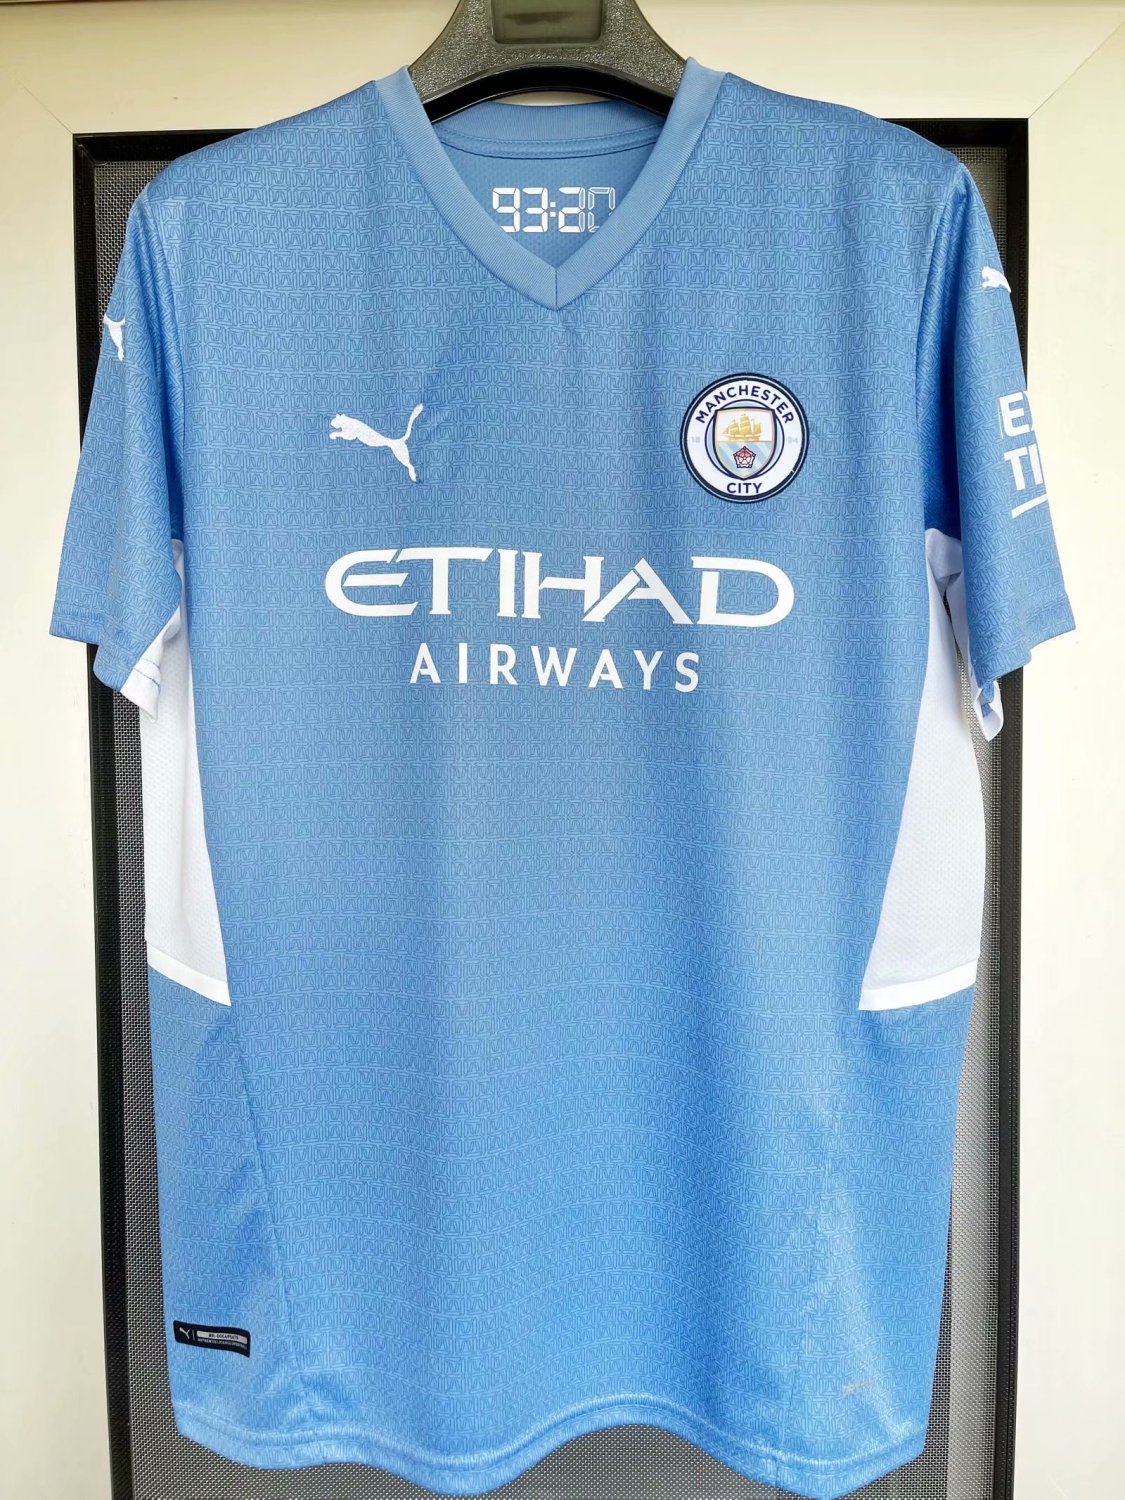 US 15.80 Mens Manchester City Home Jersey 2021/22 www